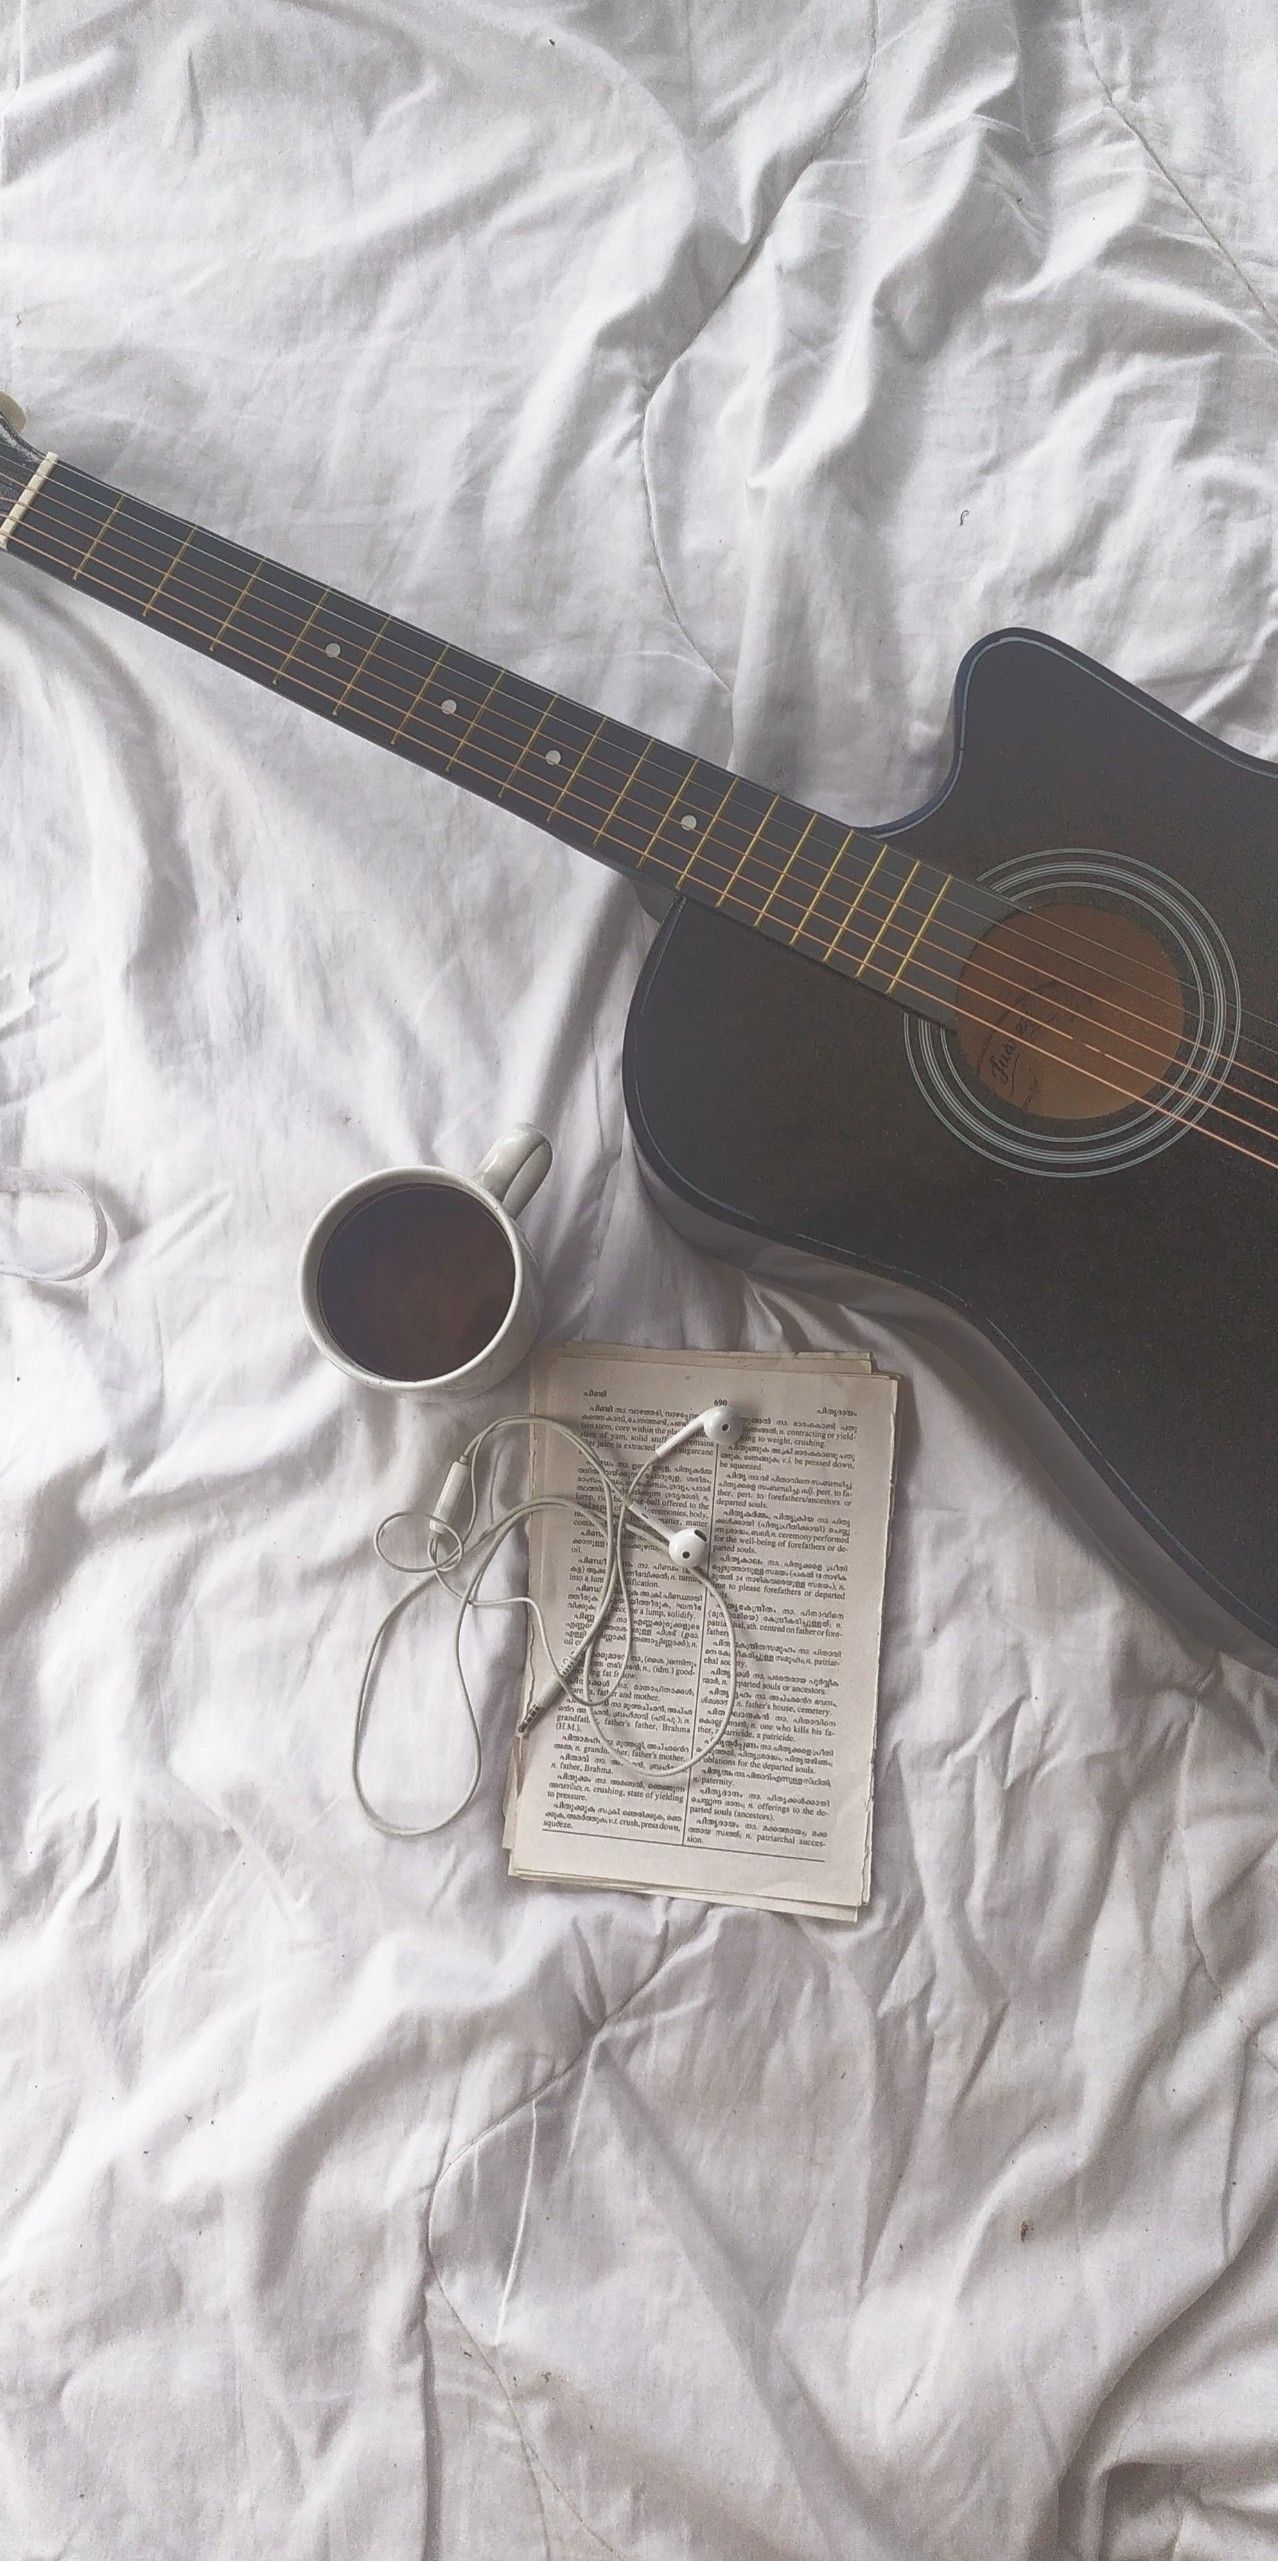 A guitar, a cup of coffee, and some earphones on a bed. - Guitar